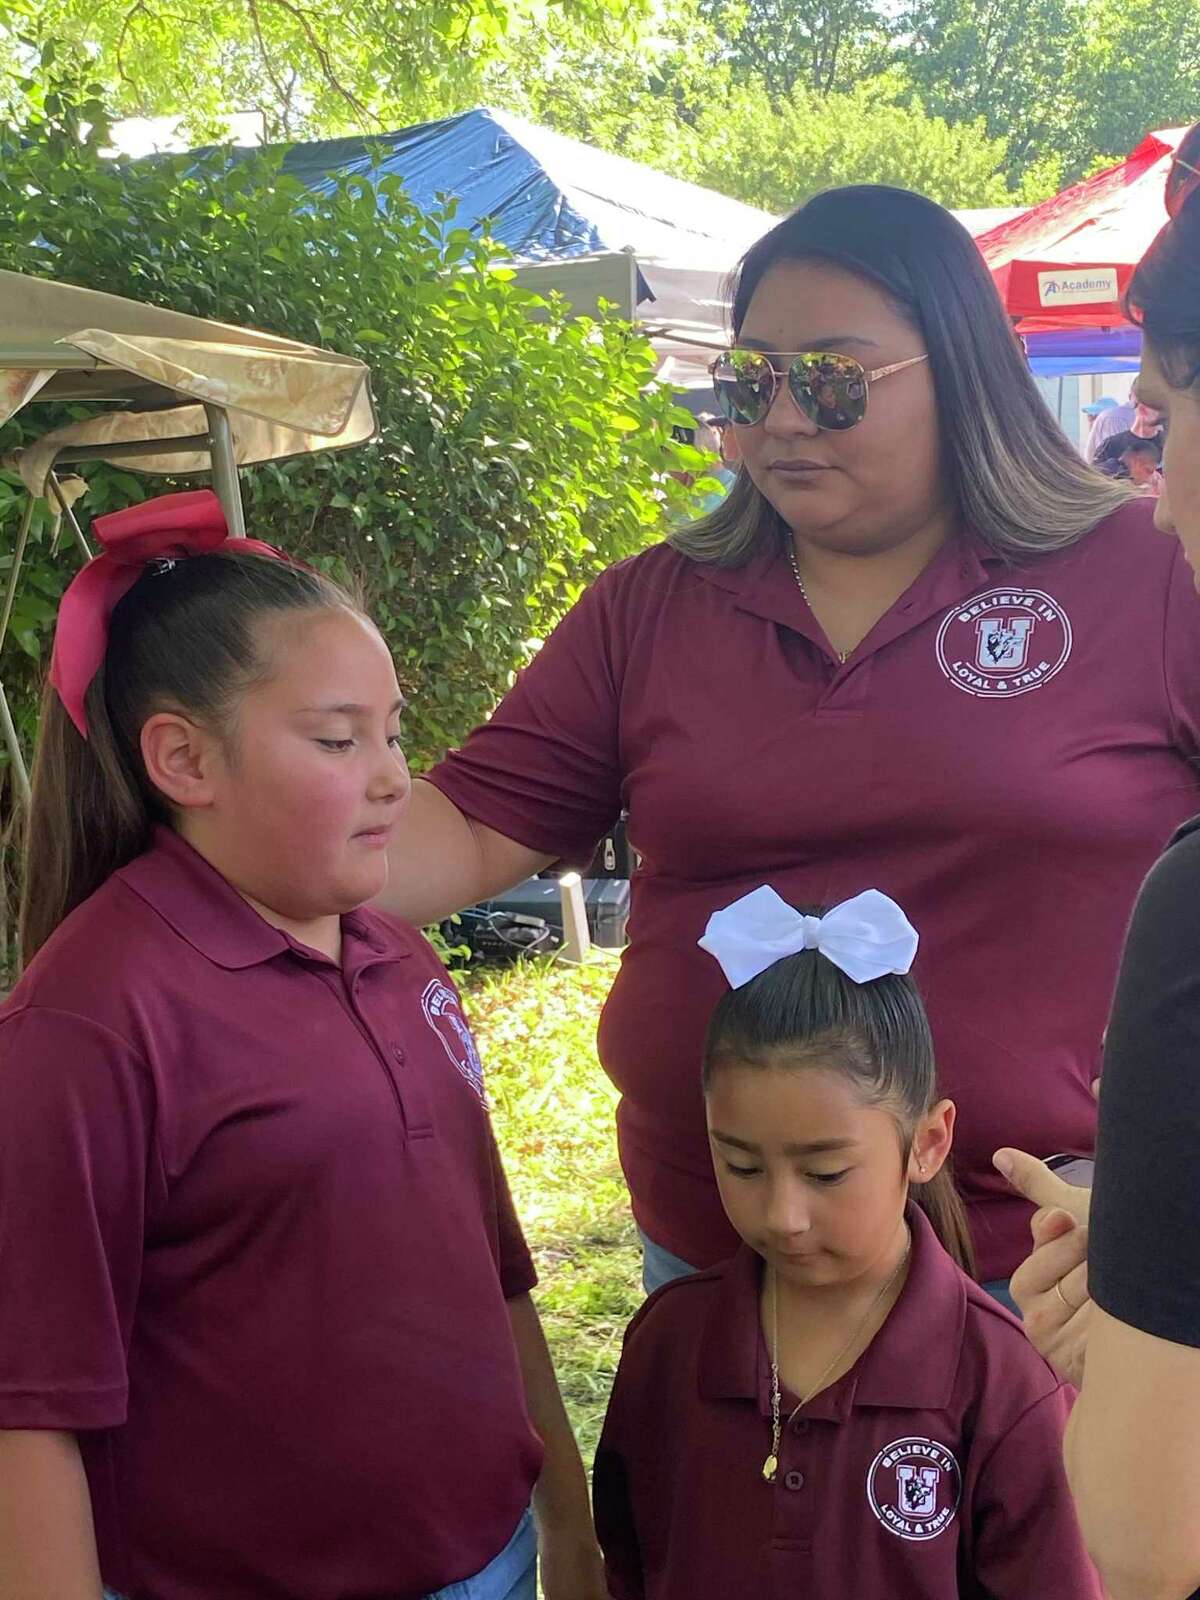 Adalynn Garza, age 9, with her mother, Monique Rodriguez, and younger sister, Kinsley. “I feel scared,” she said. “Because what happened in this grade will happen again.”